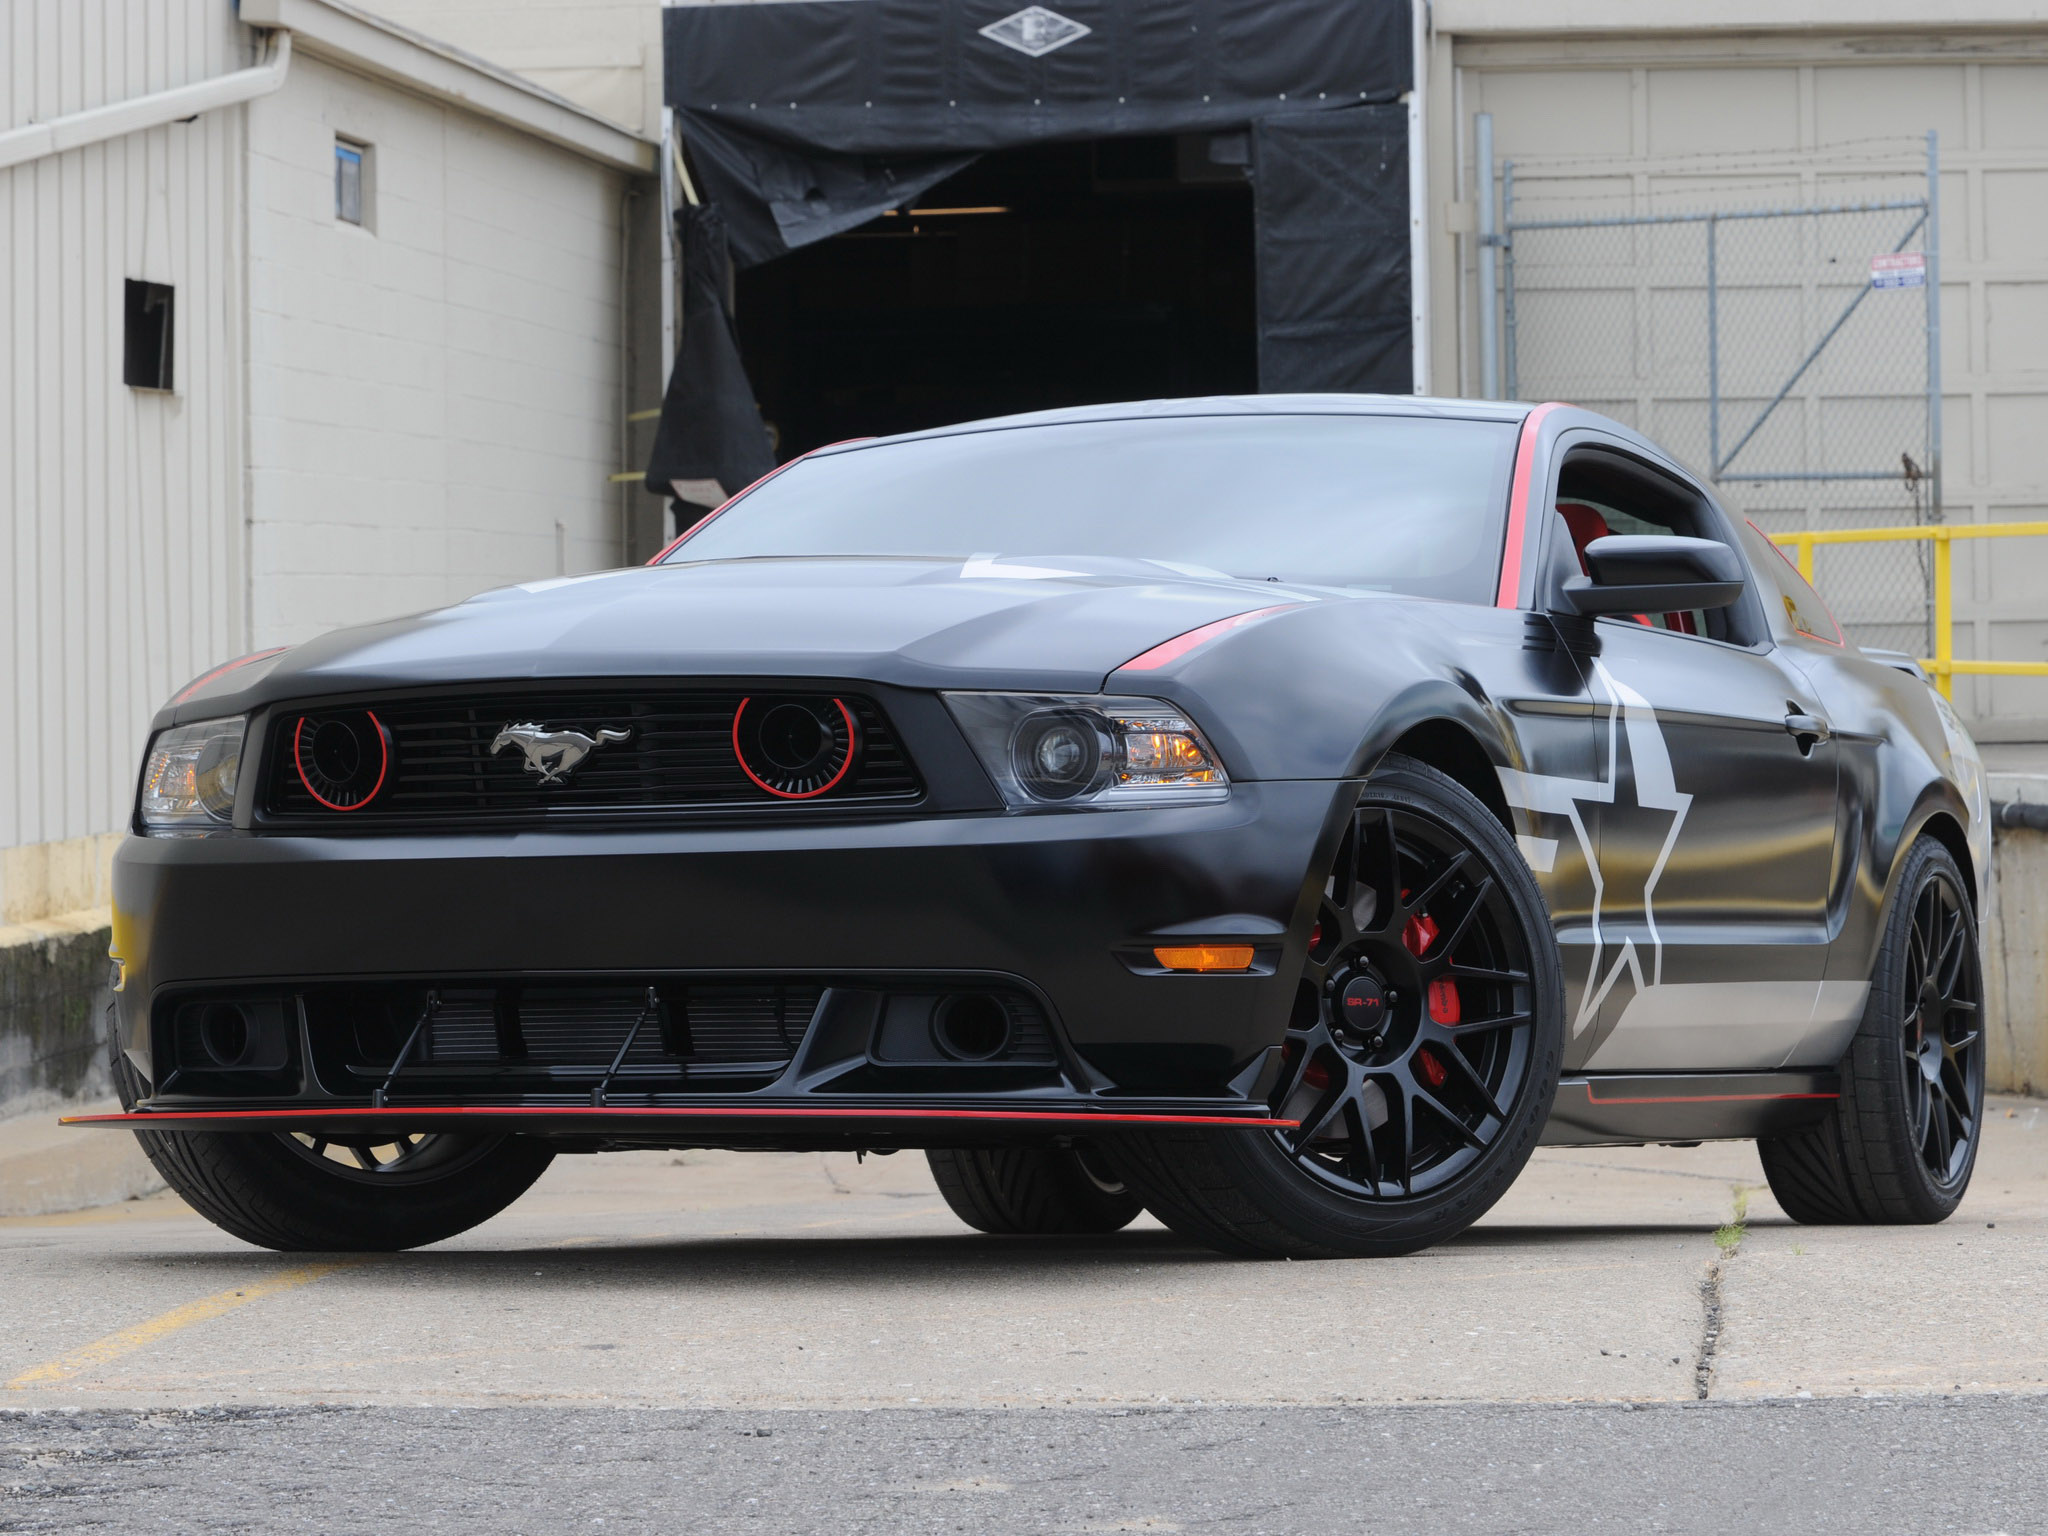 Mustang Of The Day: 2011 Ford Mustang SR-71 